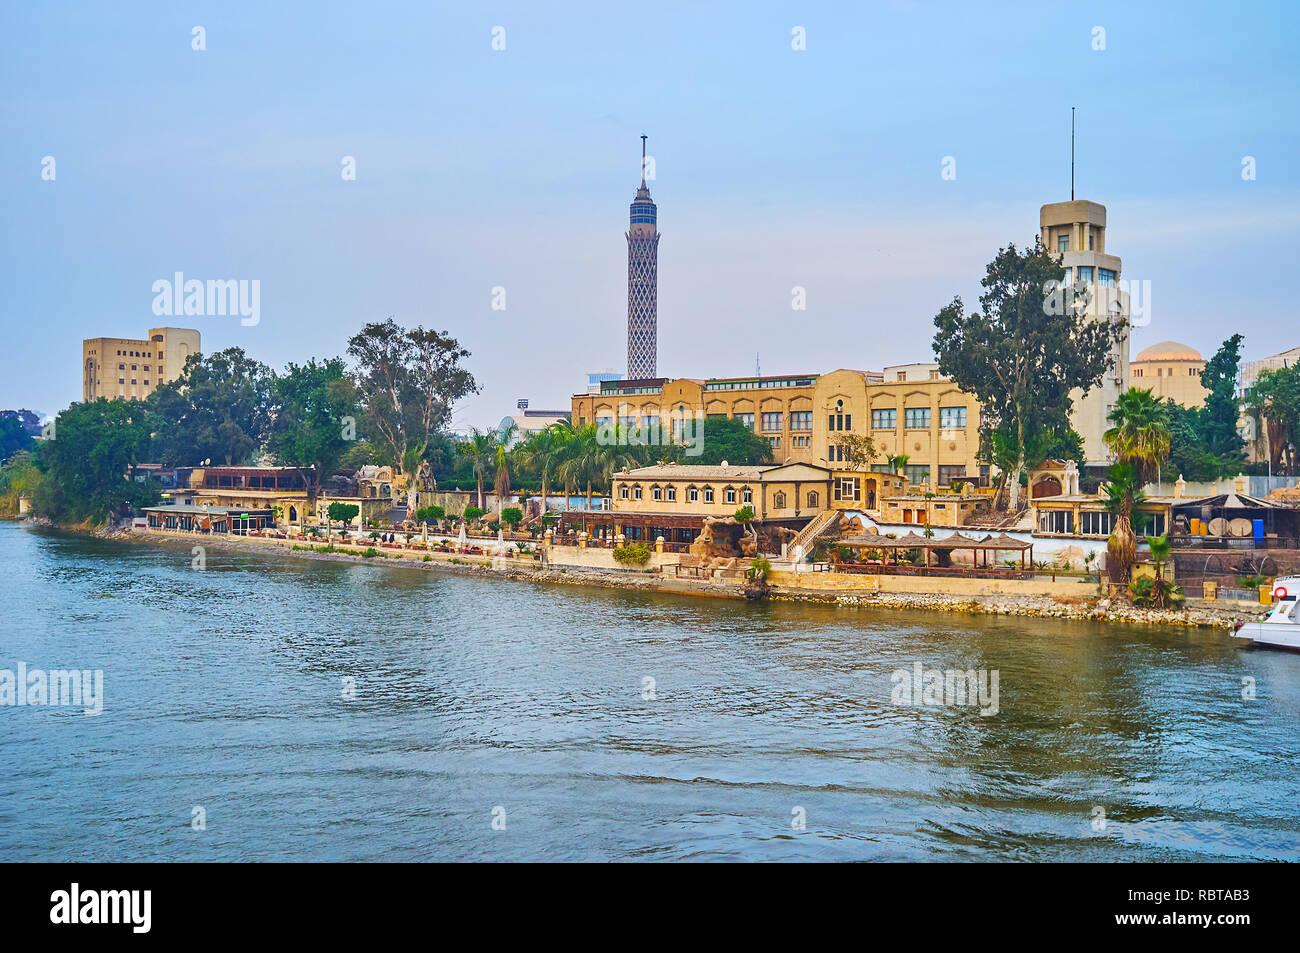 The green bank of Gezira Island with historic buildings of Cairo's National Cultural Centre, including Opera House and other performing arts theatres, Stock Photo